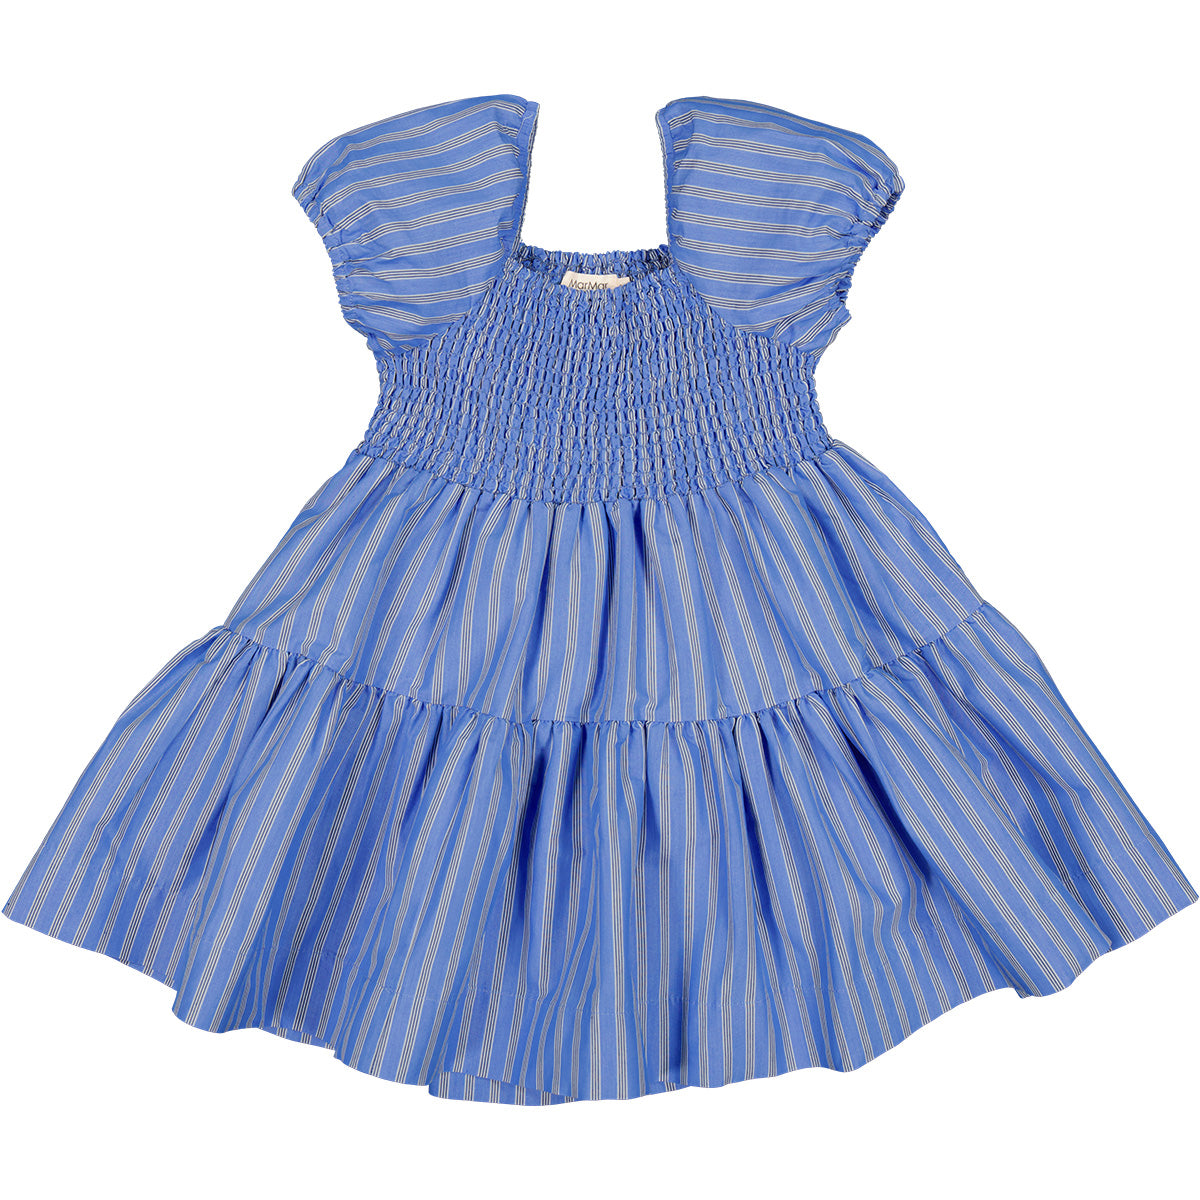 The Dyman Dress from MarMar Copenhagen. A lovely summer dress with a smocked top and puff sleeves